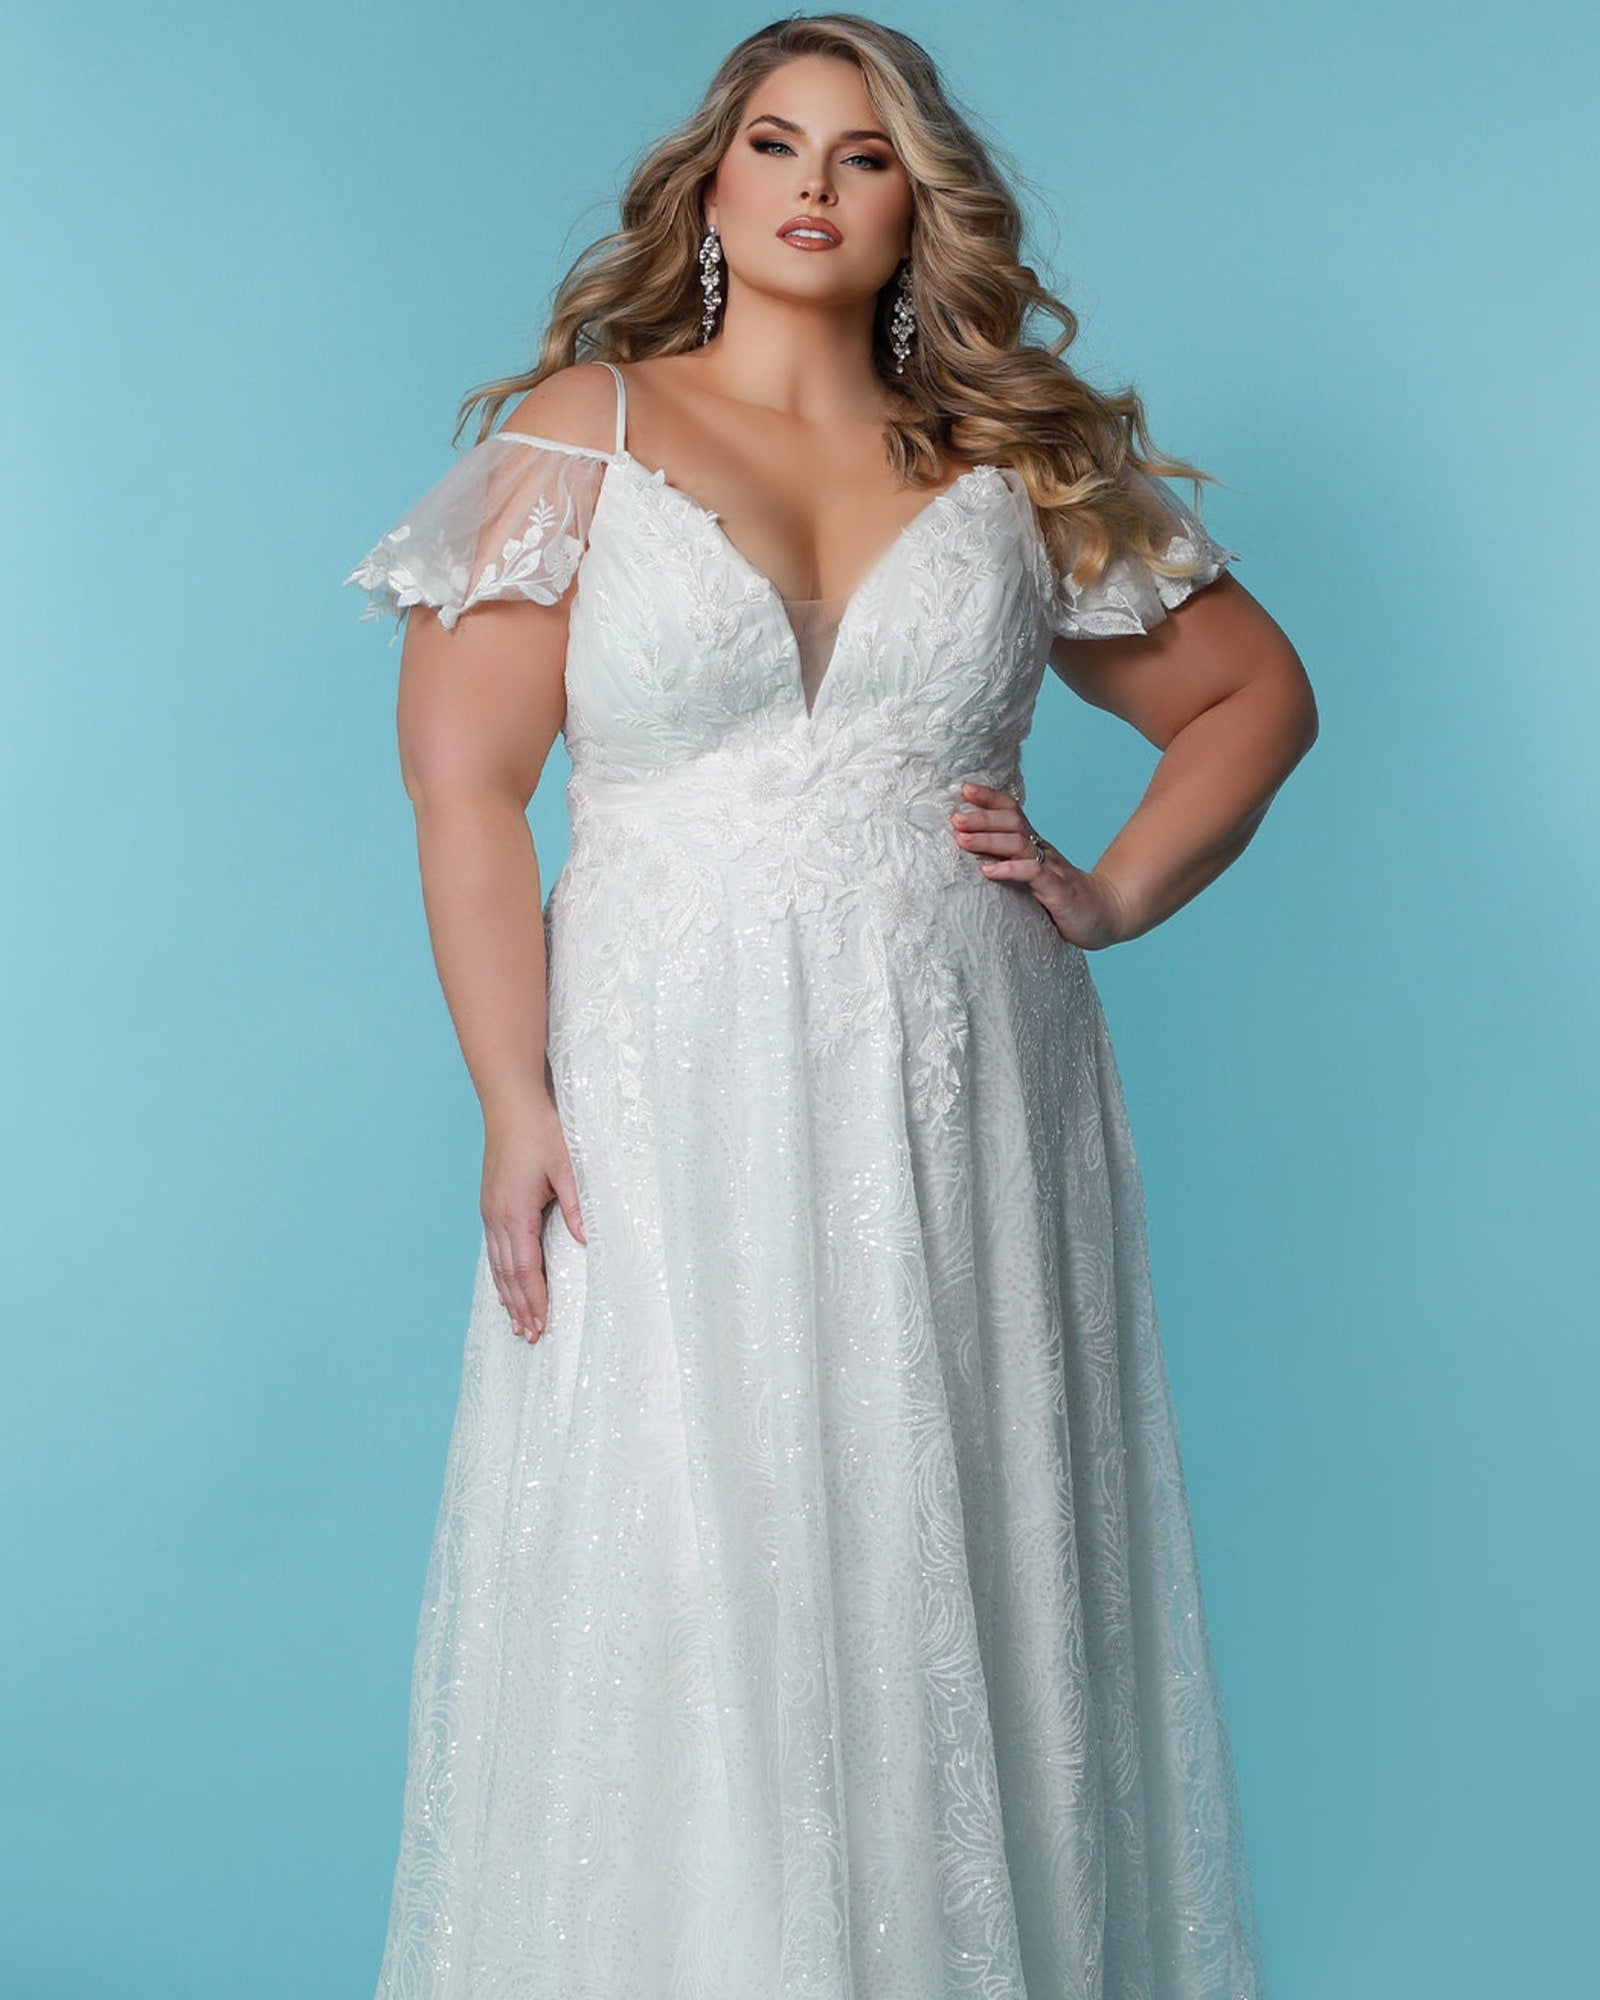 Plus size beach gowns for women photos – The 27 Best Plus Size Wedding  Dresses of – Blouses Discover the Latest Best Selling Shop women's shirts  high-quality blouses